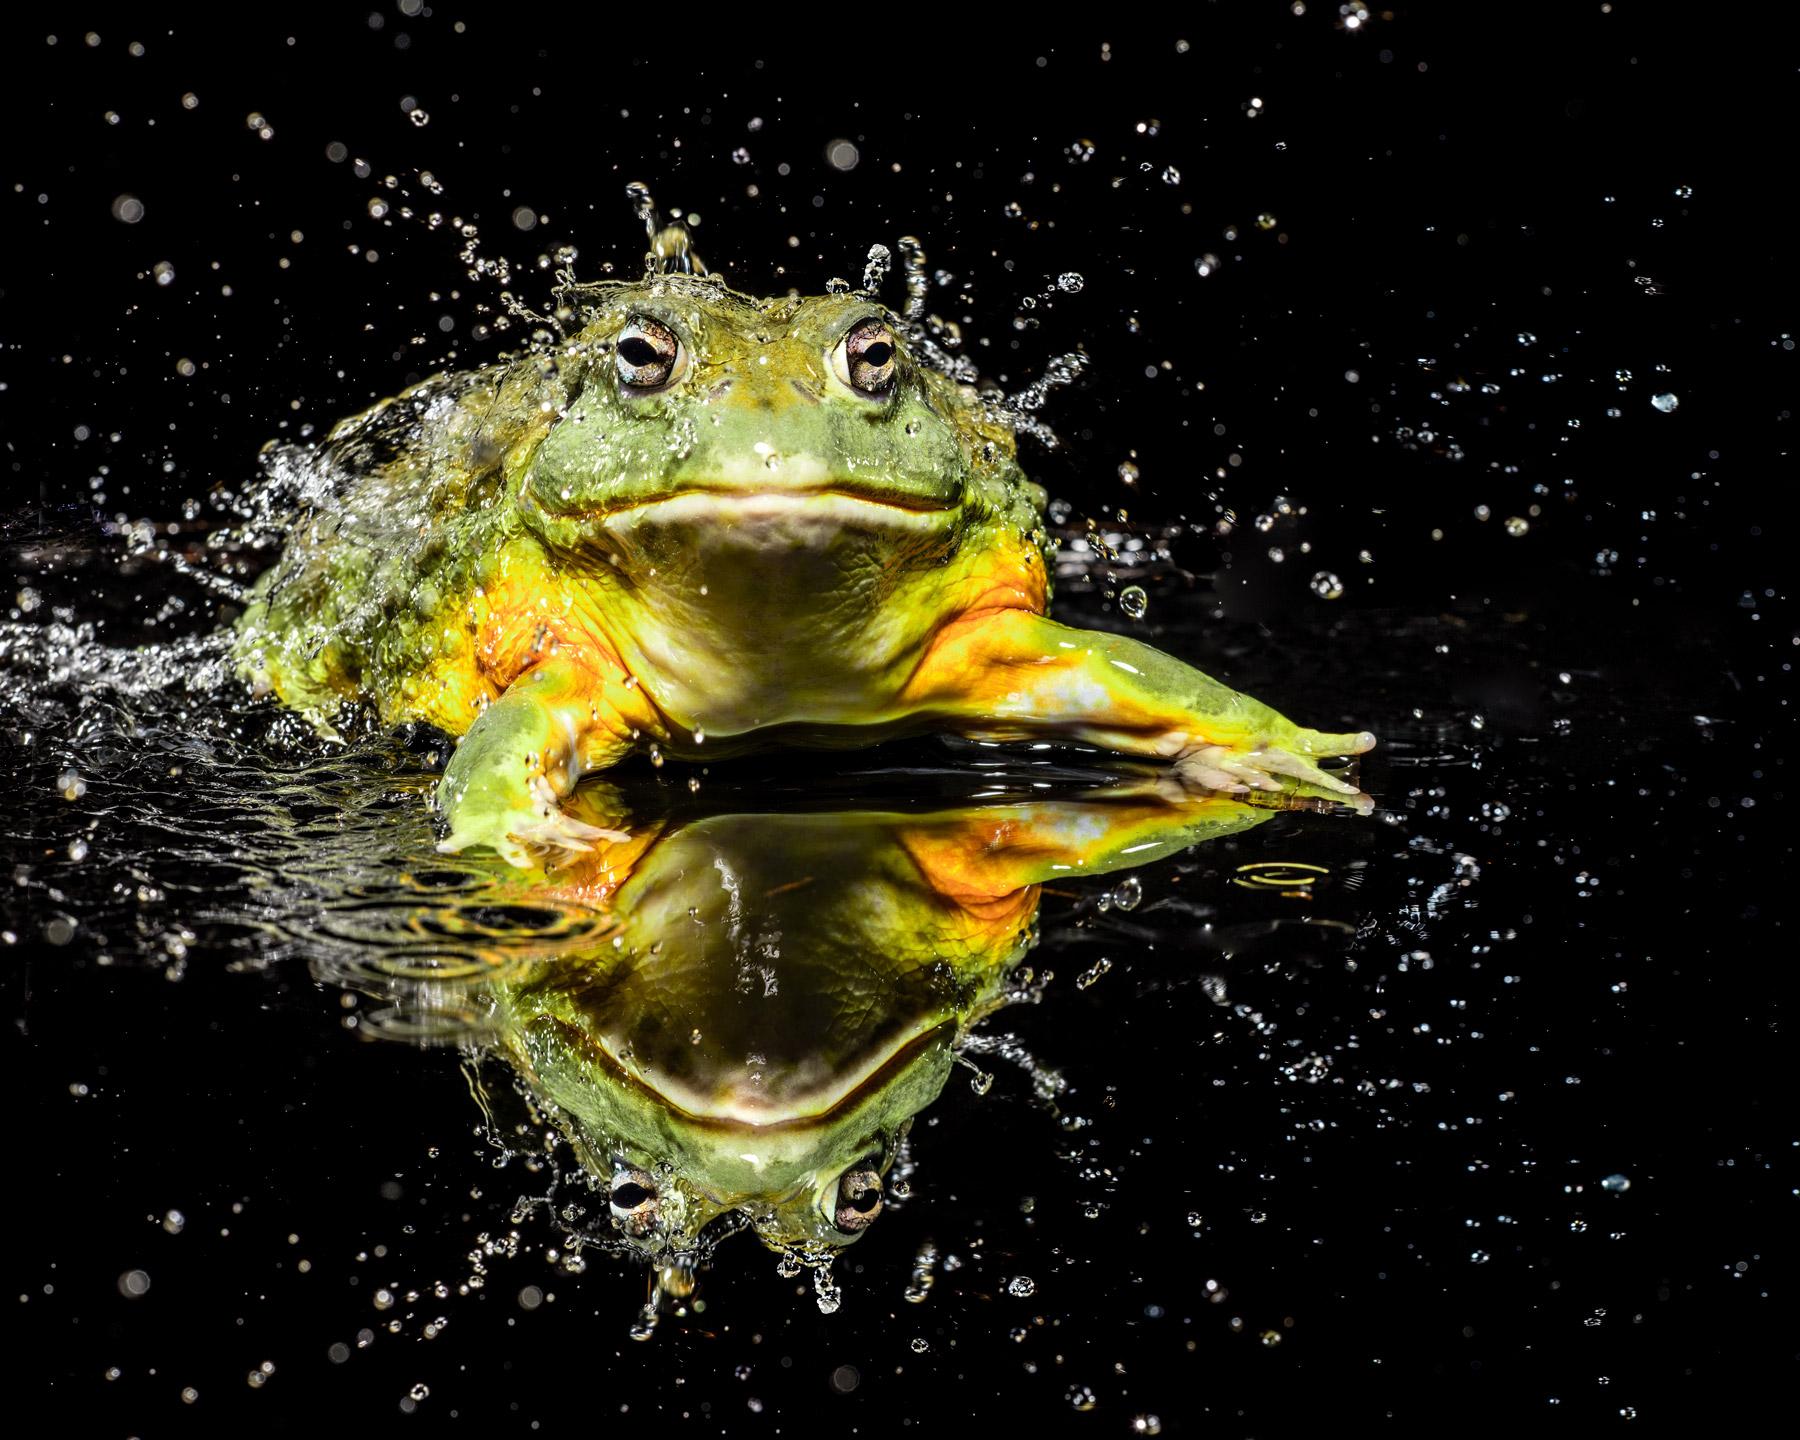 Bullfrog #1 - Signed limited edition wildlife fine art, Contemporary Portrait For Sale 2